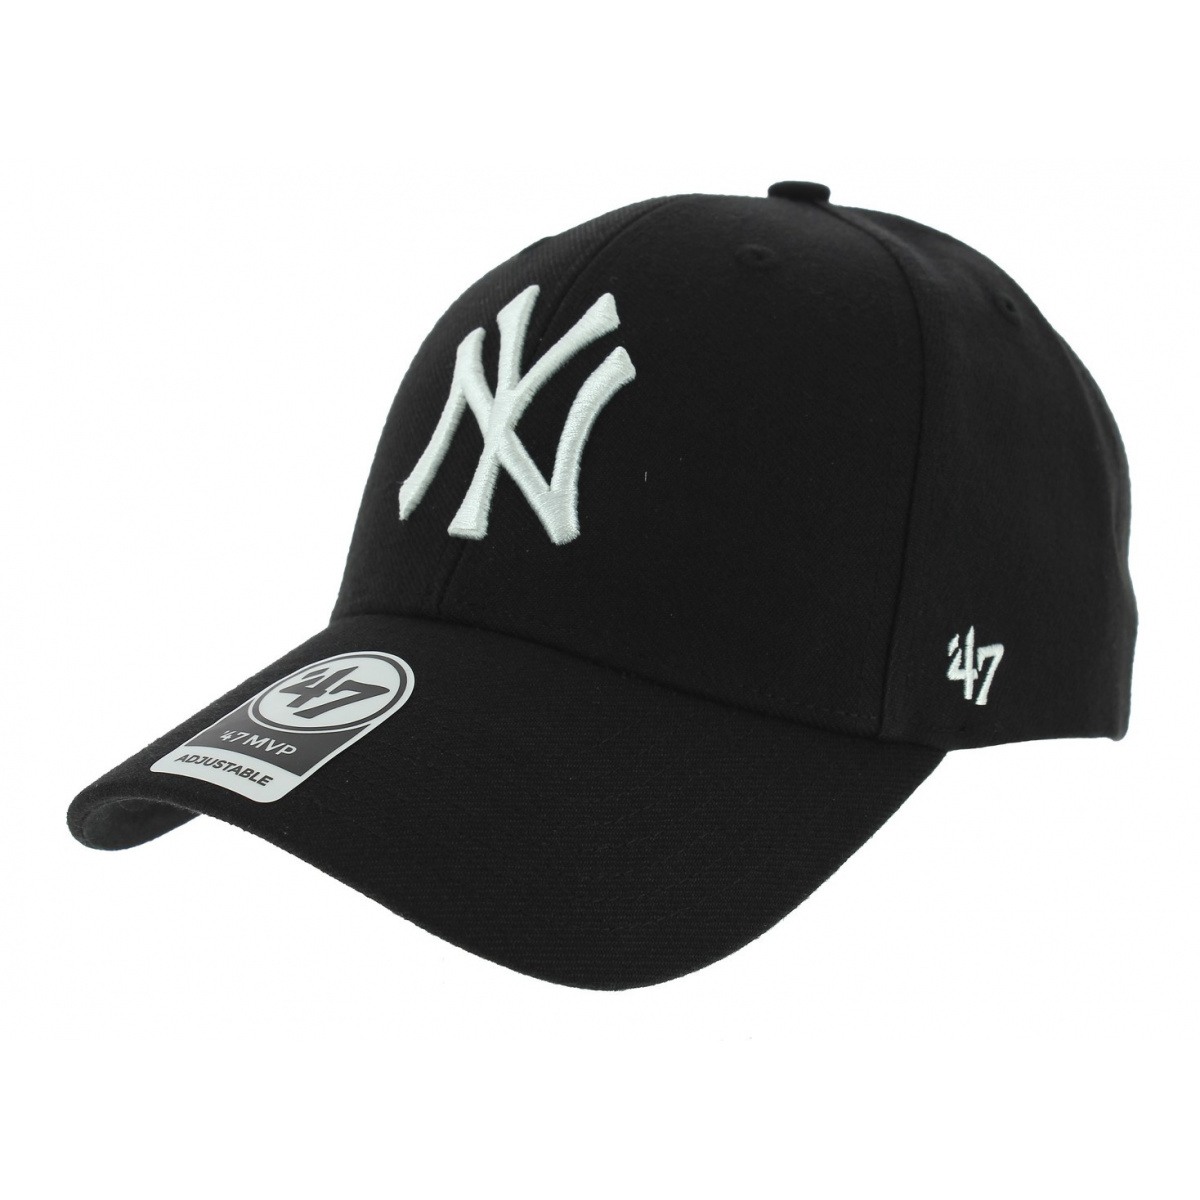 Casquette Snapback Yankees NY Laine Noir - 47 Brand Reference